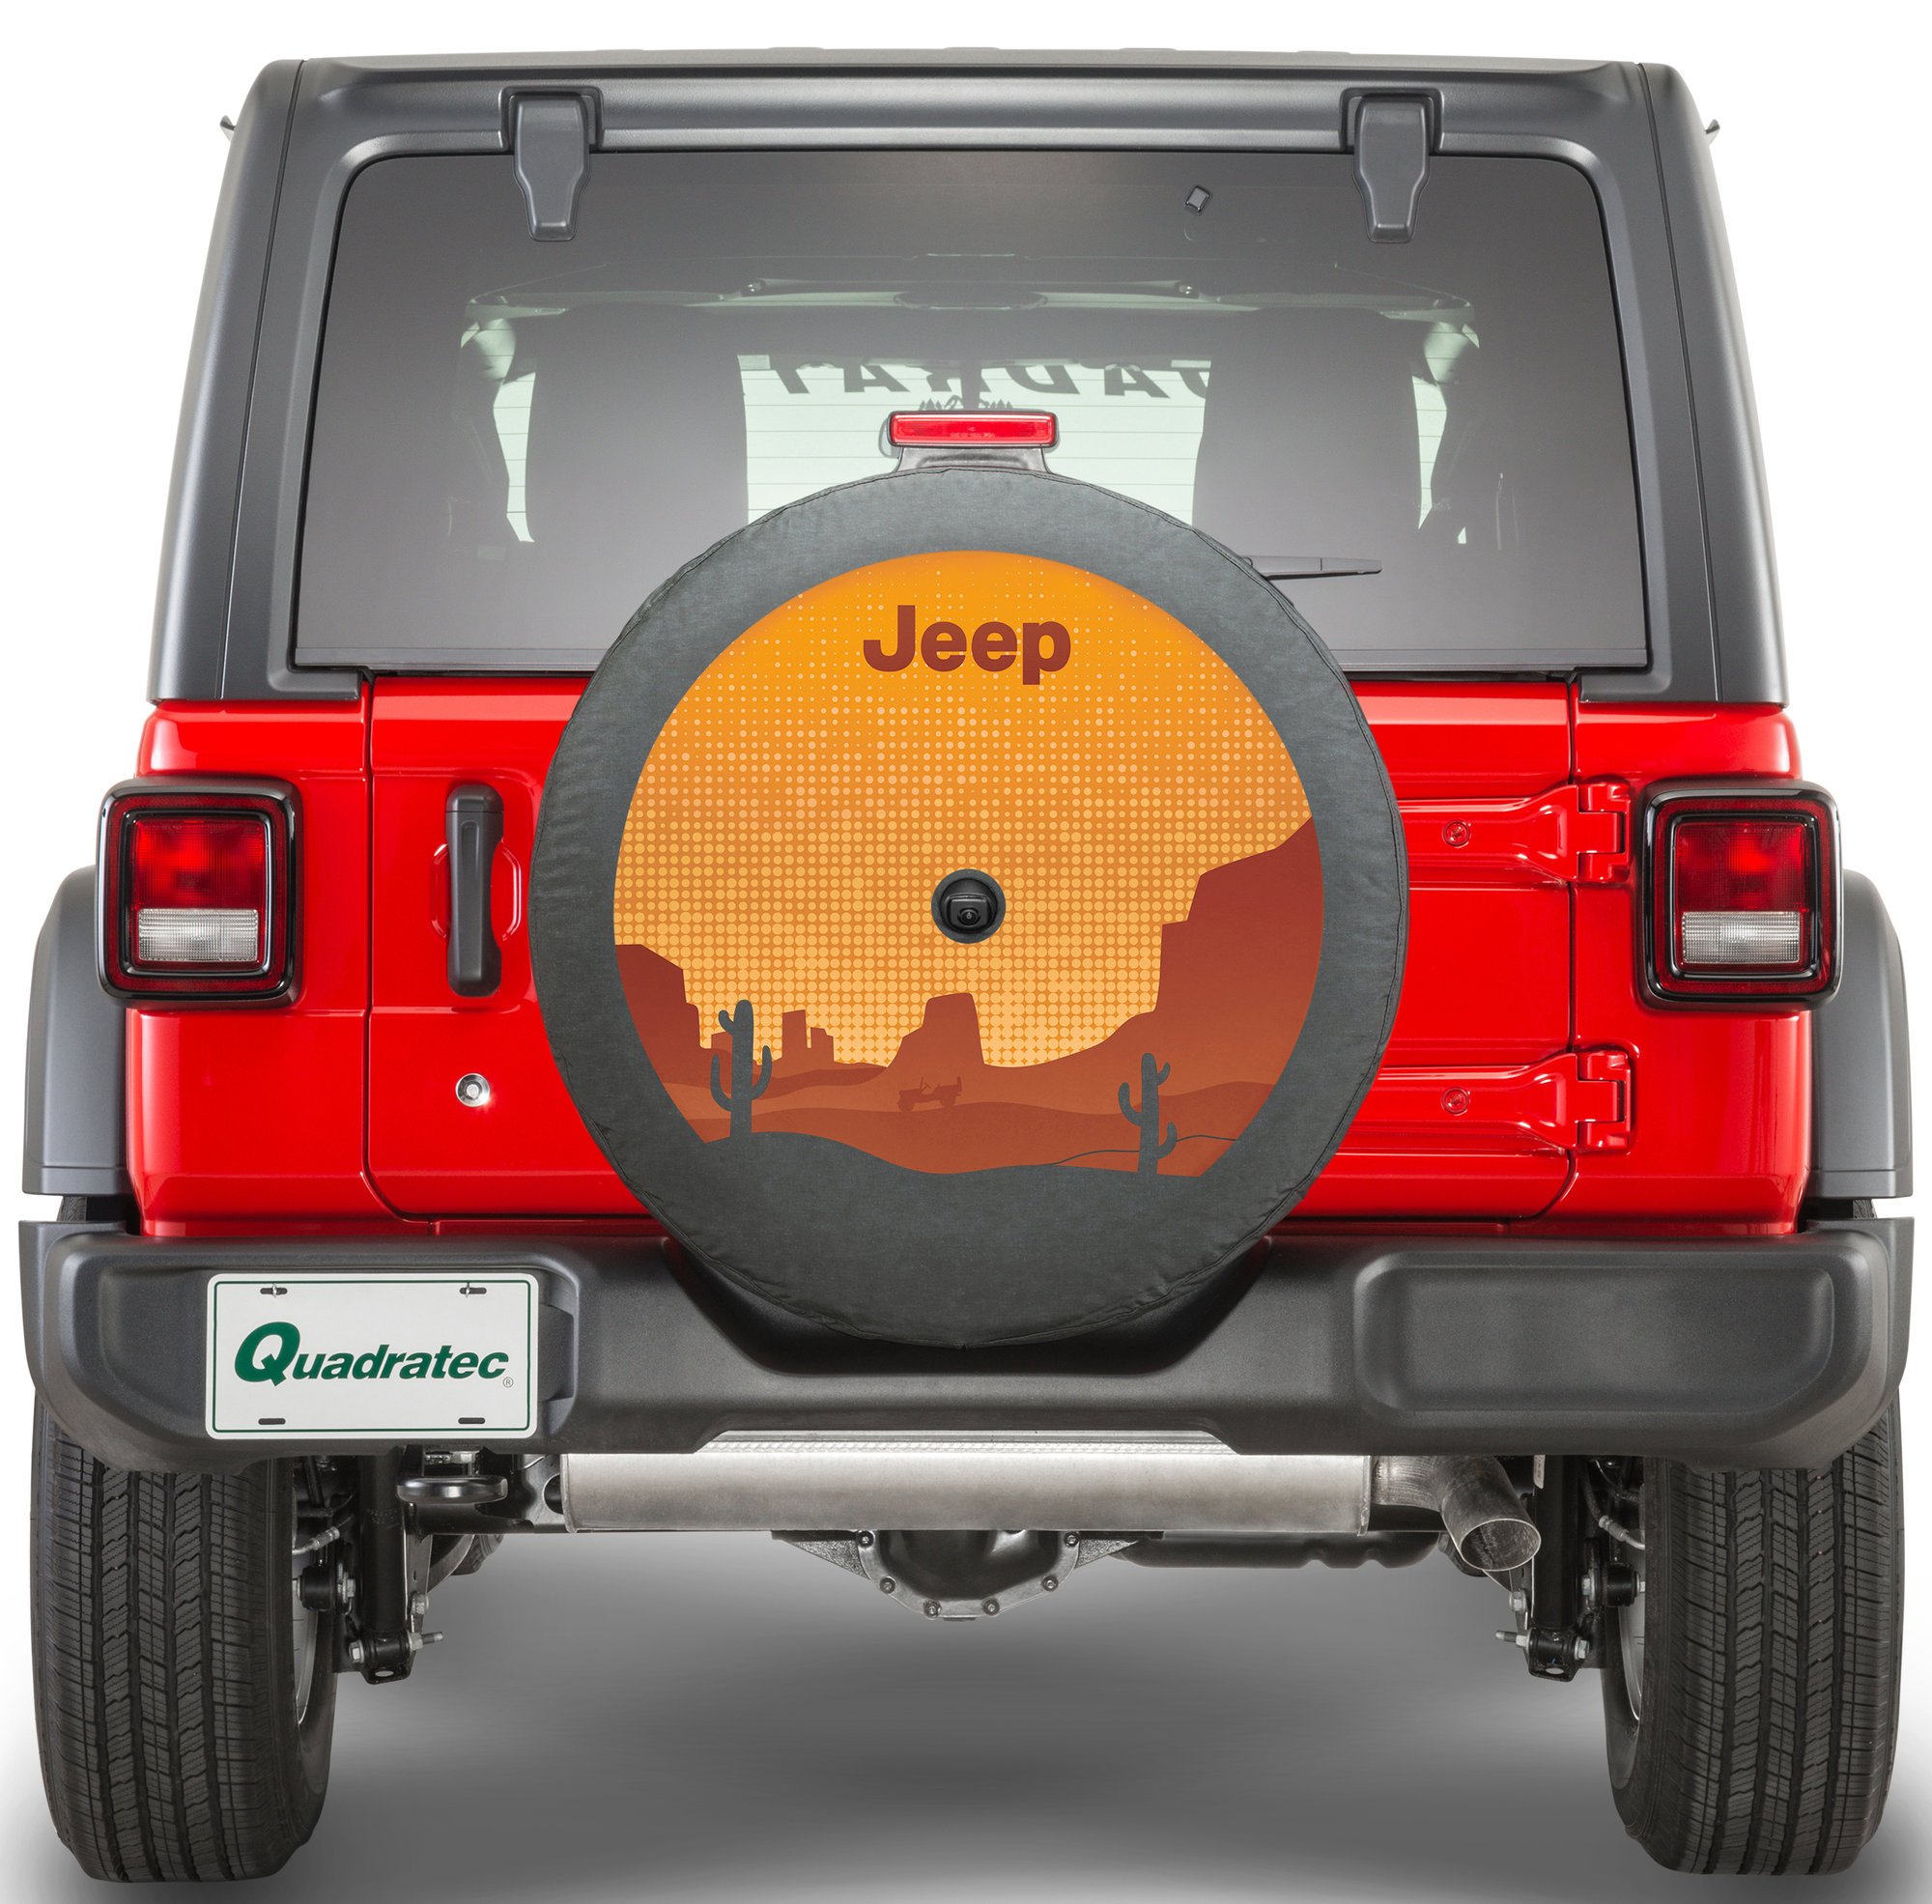 JL Spare Tire Cover The Wave Hand Print Community Free Spirit Fun Fits: Jeep